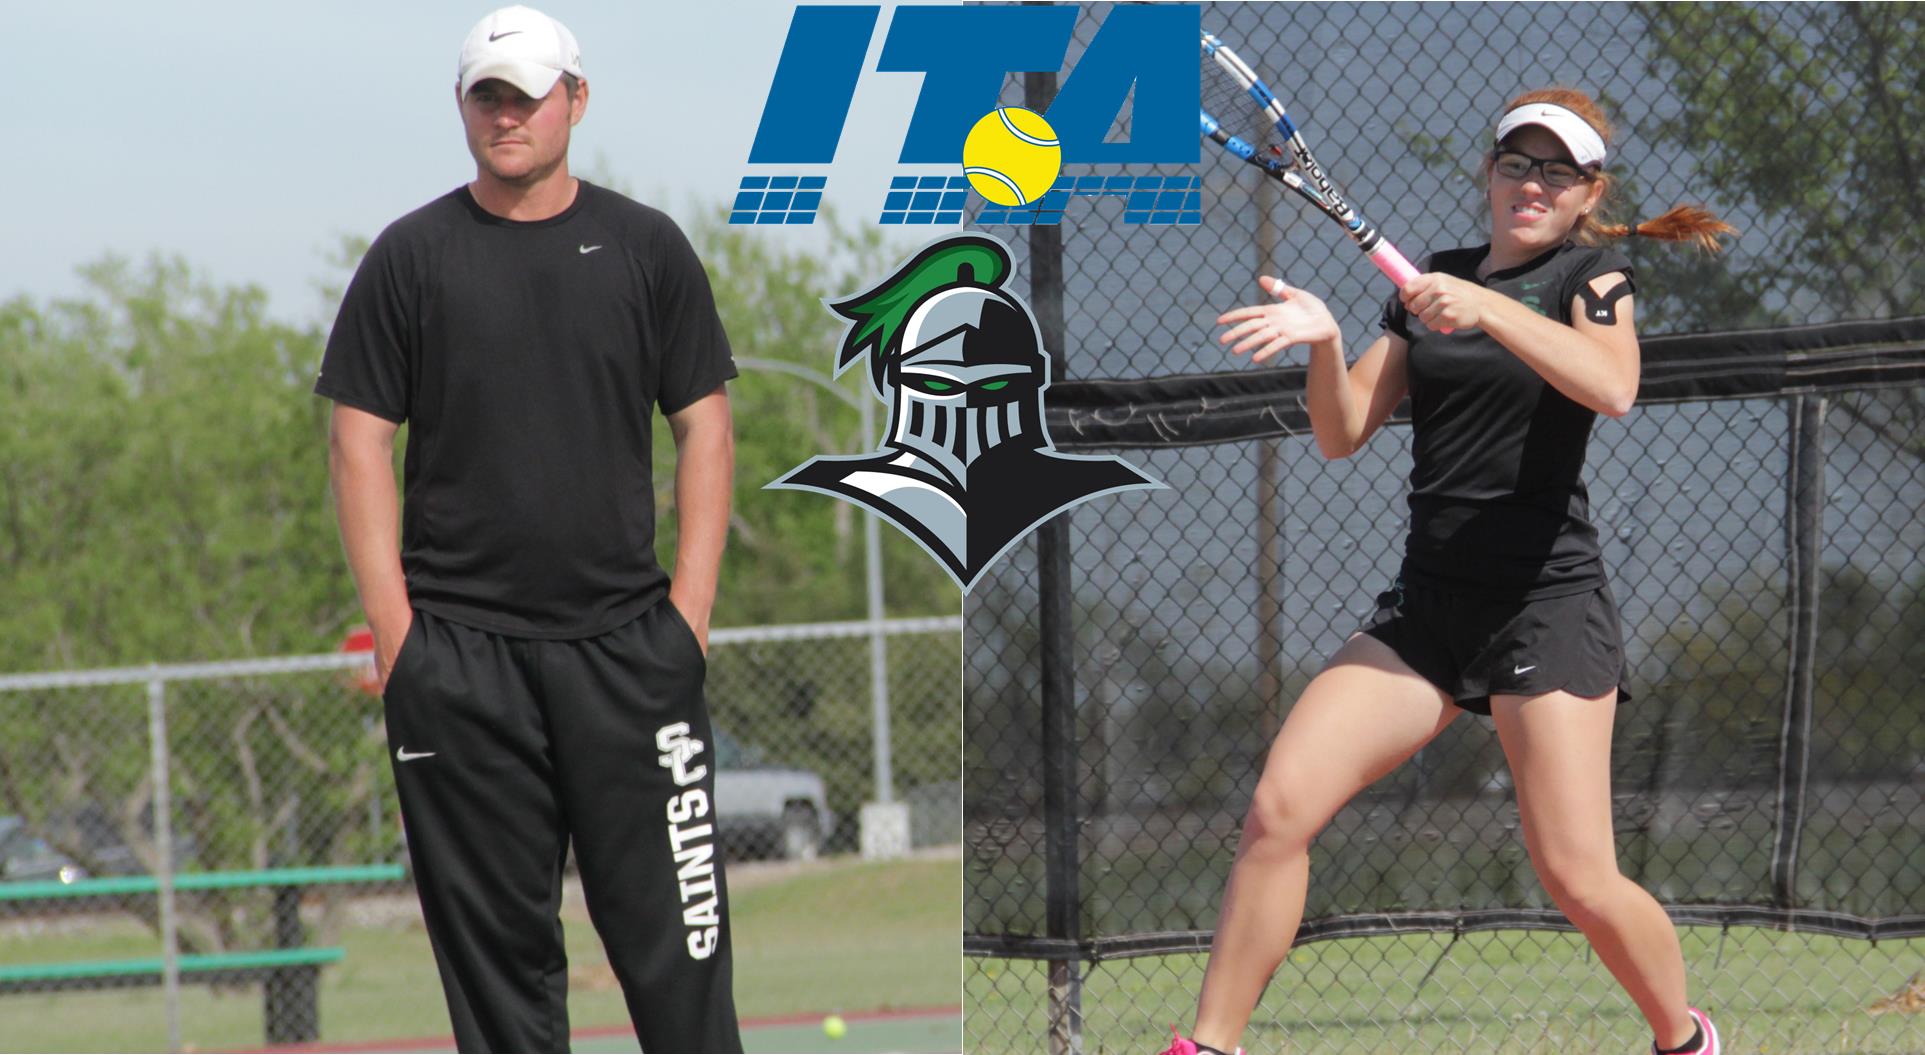 Ashley/Borges Honored By ITA